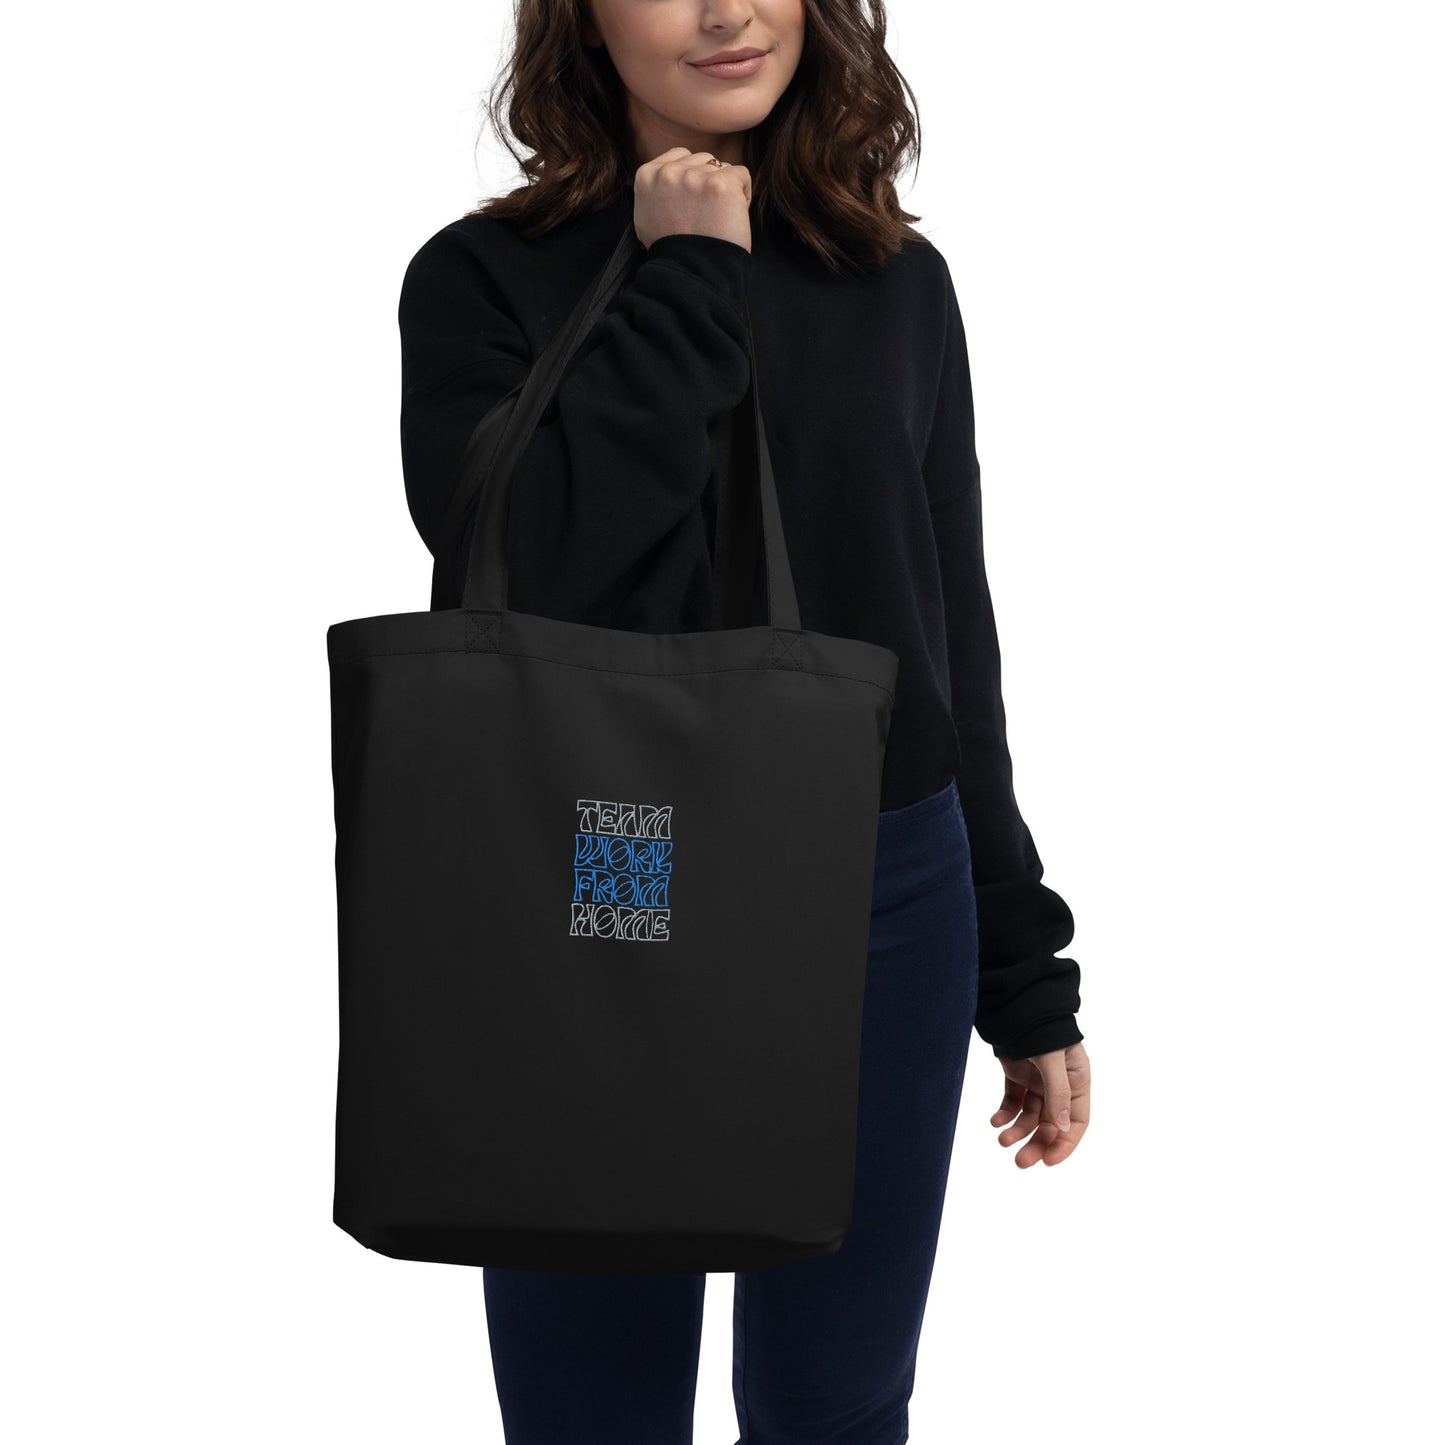 Team Work From Home Eco Tote Bag